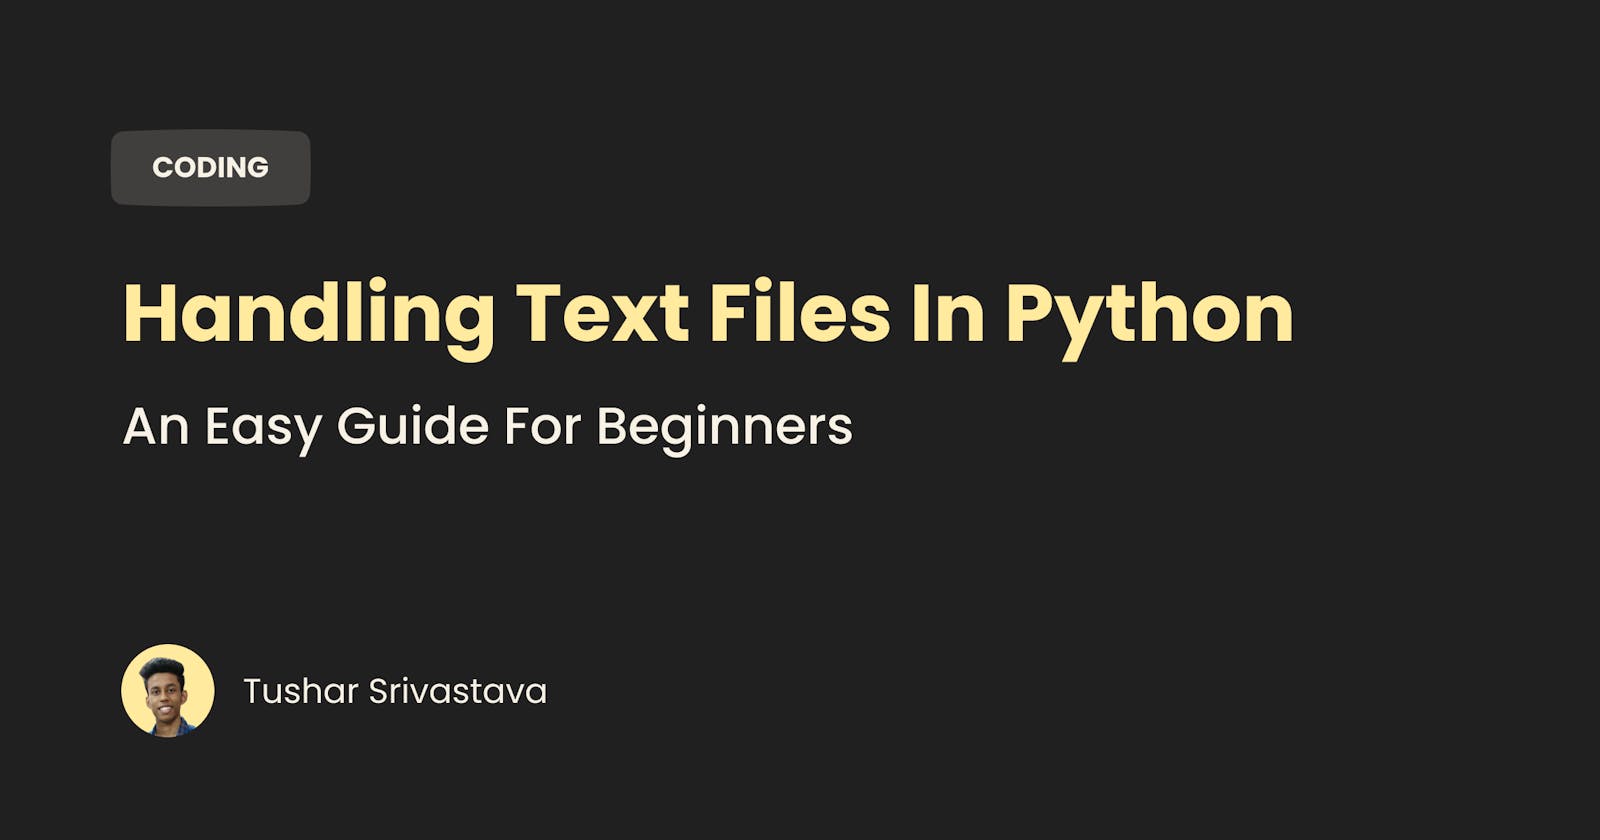 Handling text files in python - an easy guide for beginners